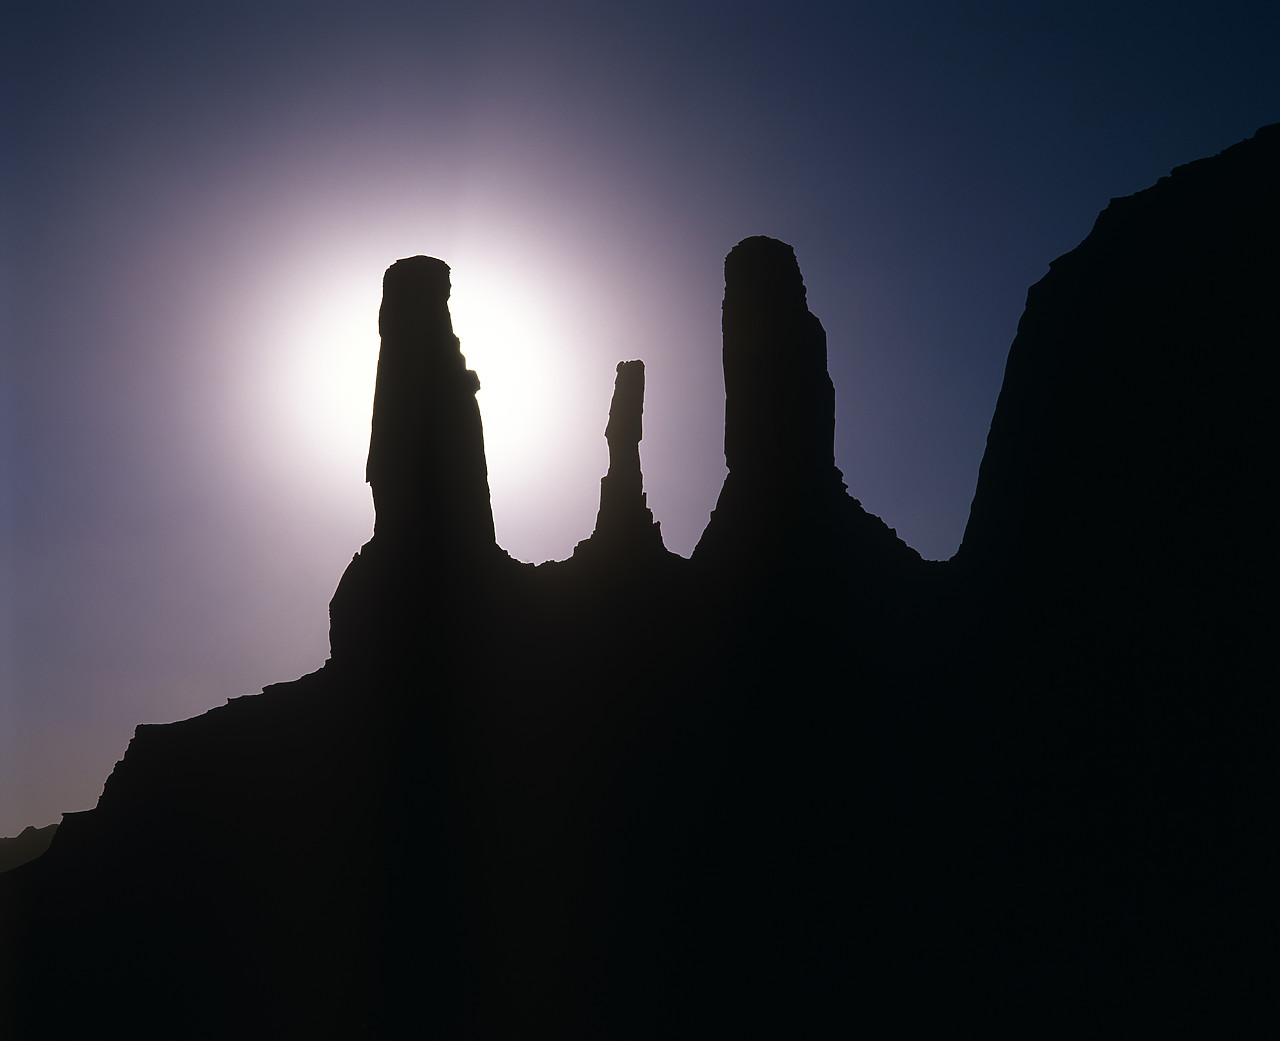 #010719-1 - Three Sisters Butte in Silhouette, Monument Valley, Arizona, USA